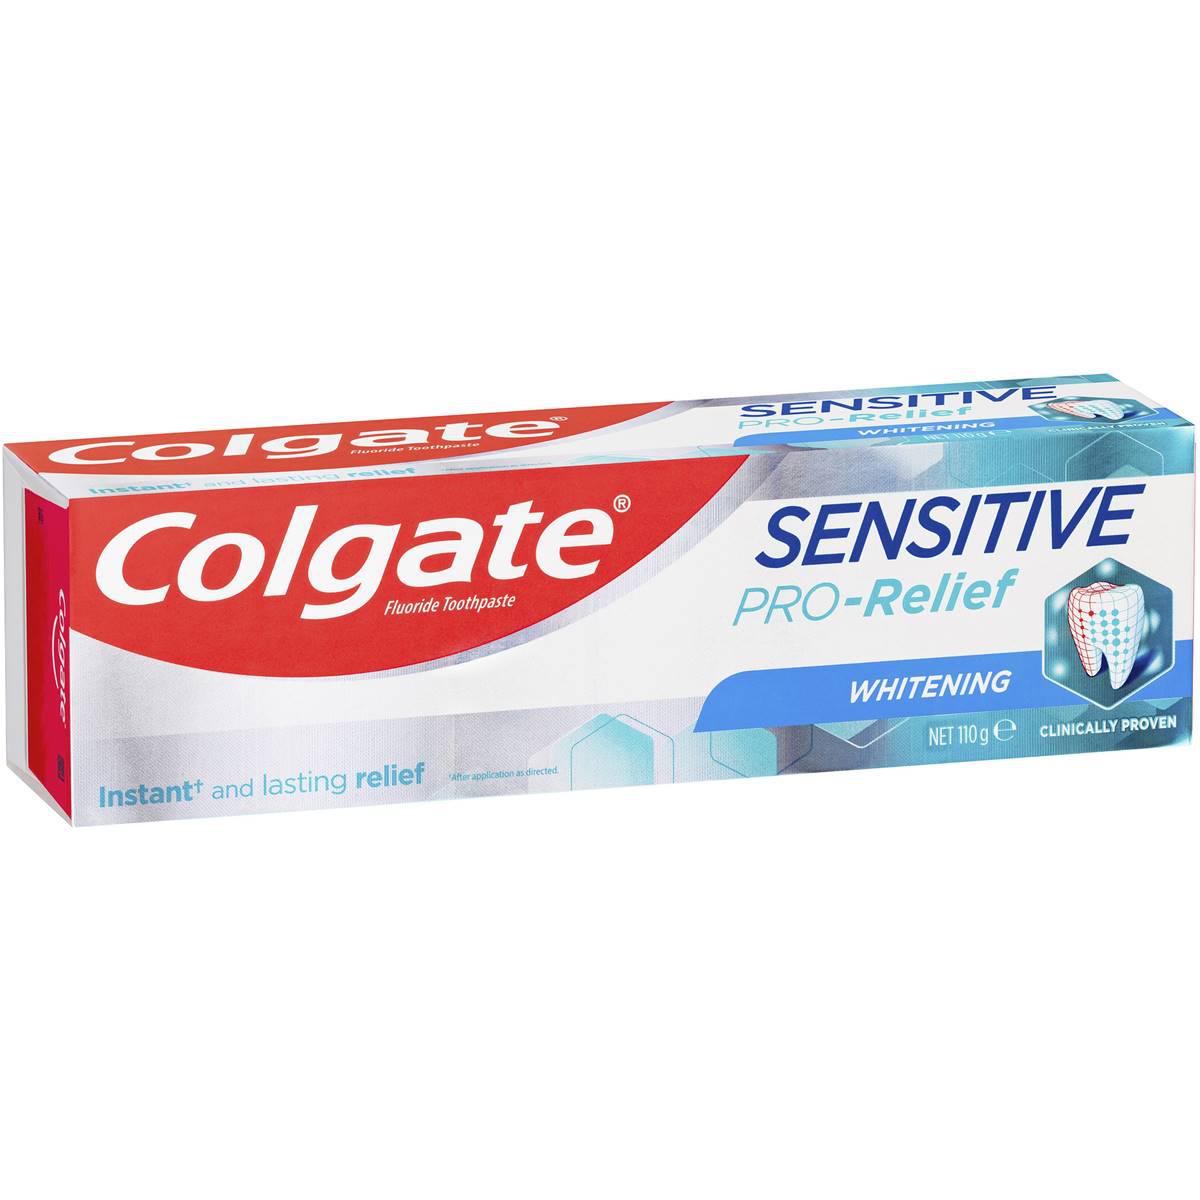 Colgate Sensitive Pro-relief Whitening Teeth Pain Toothpaste 110g